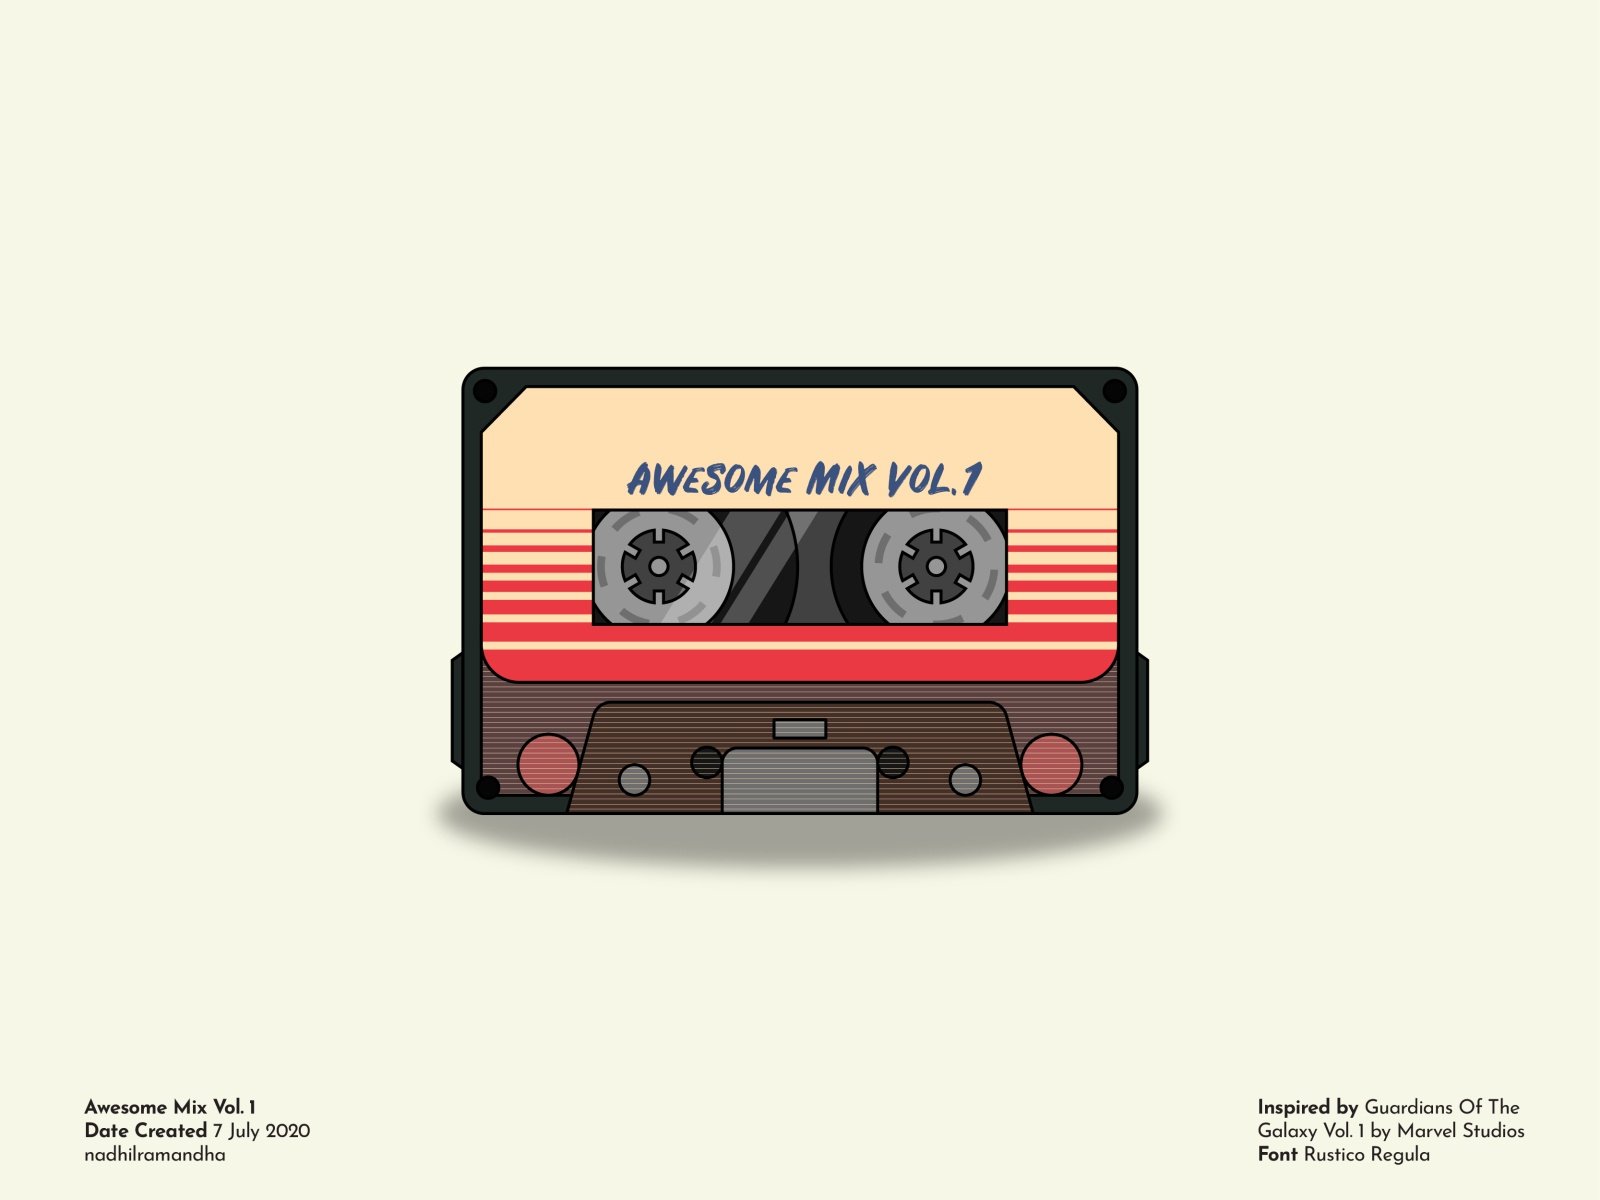 GOTG Awesome Mix Vol. 1 Cassette